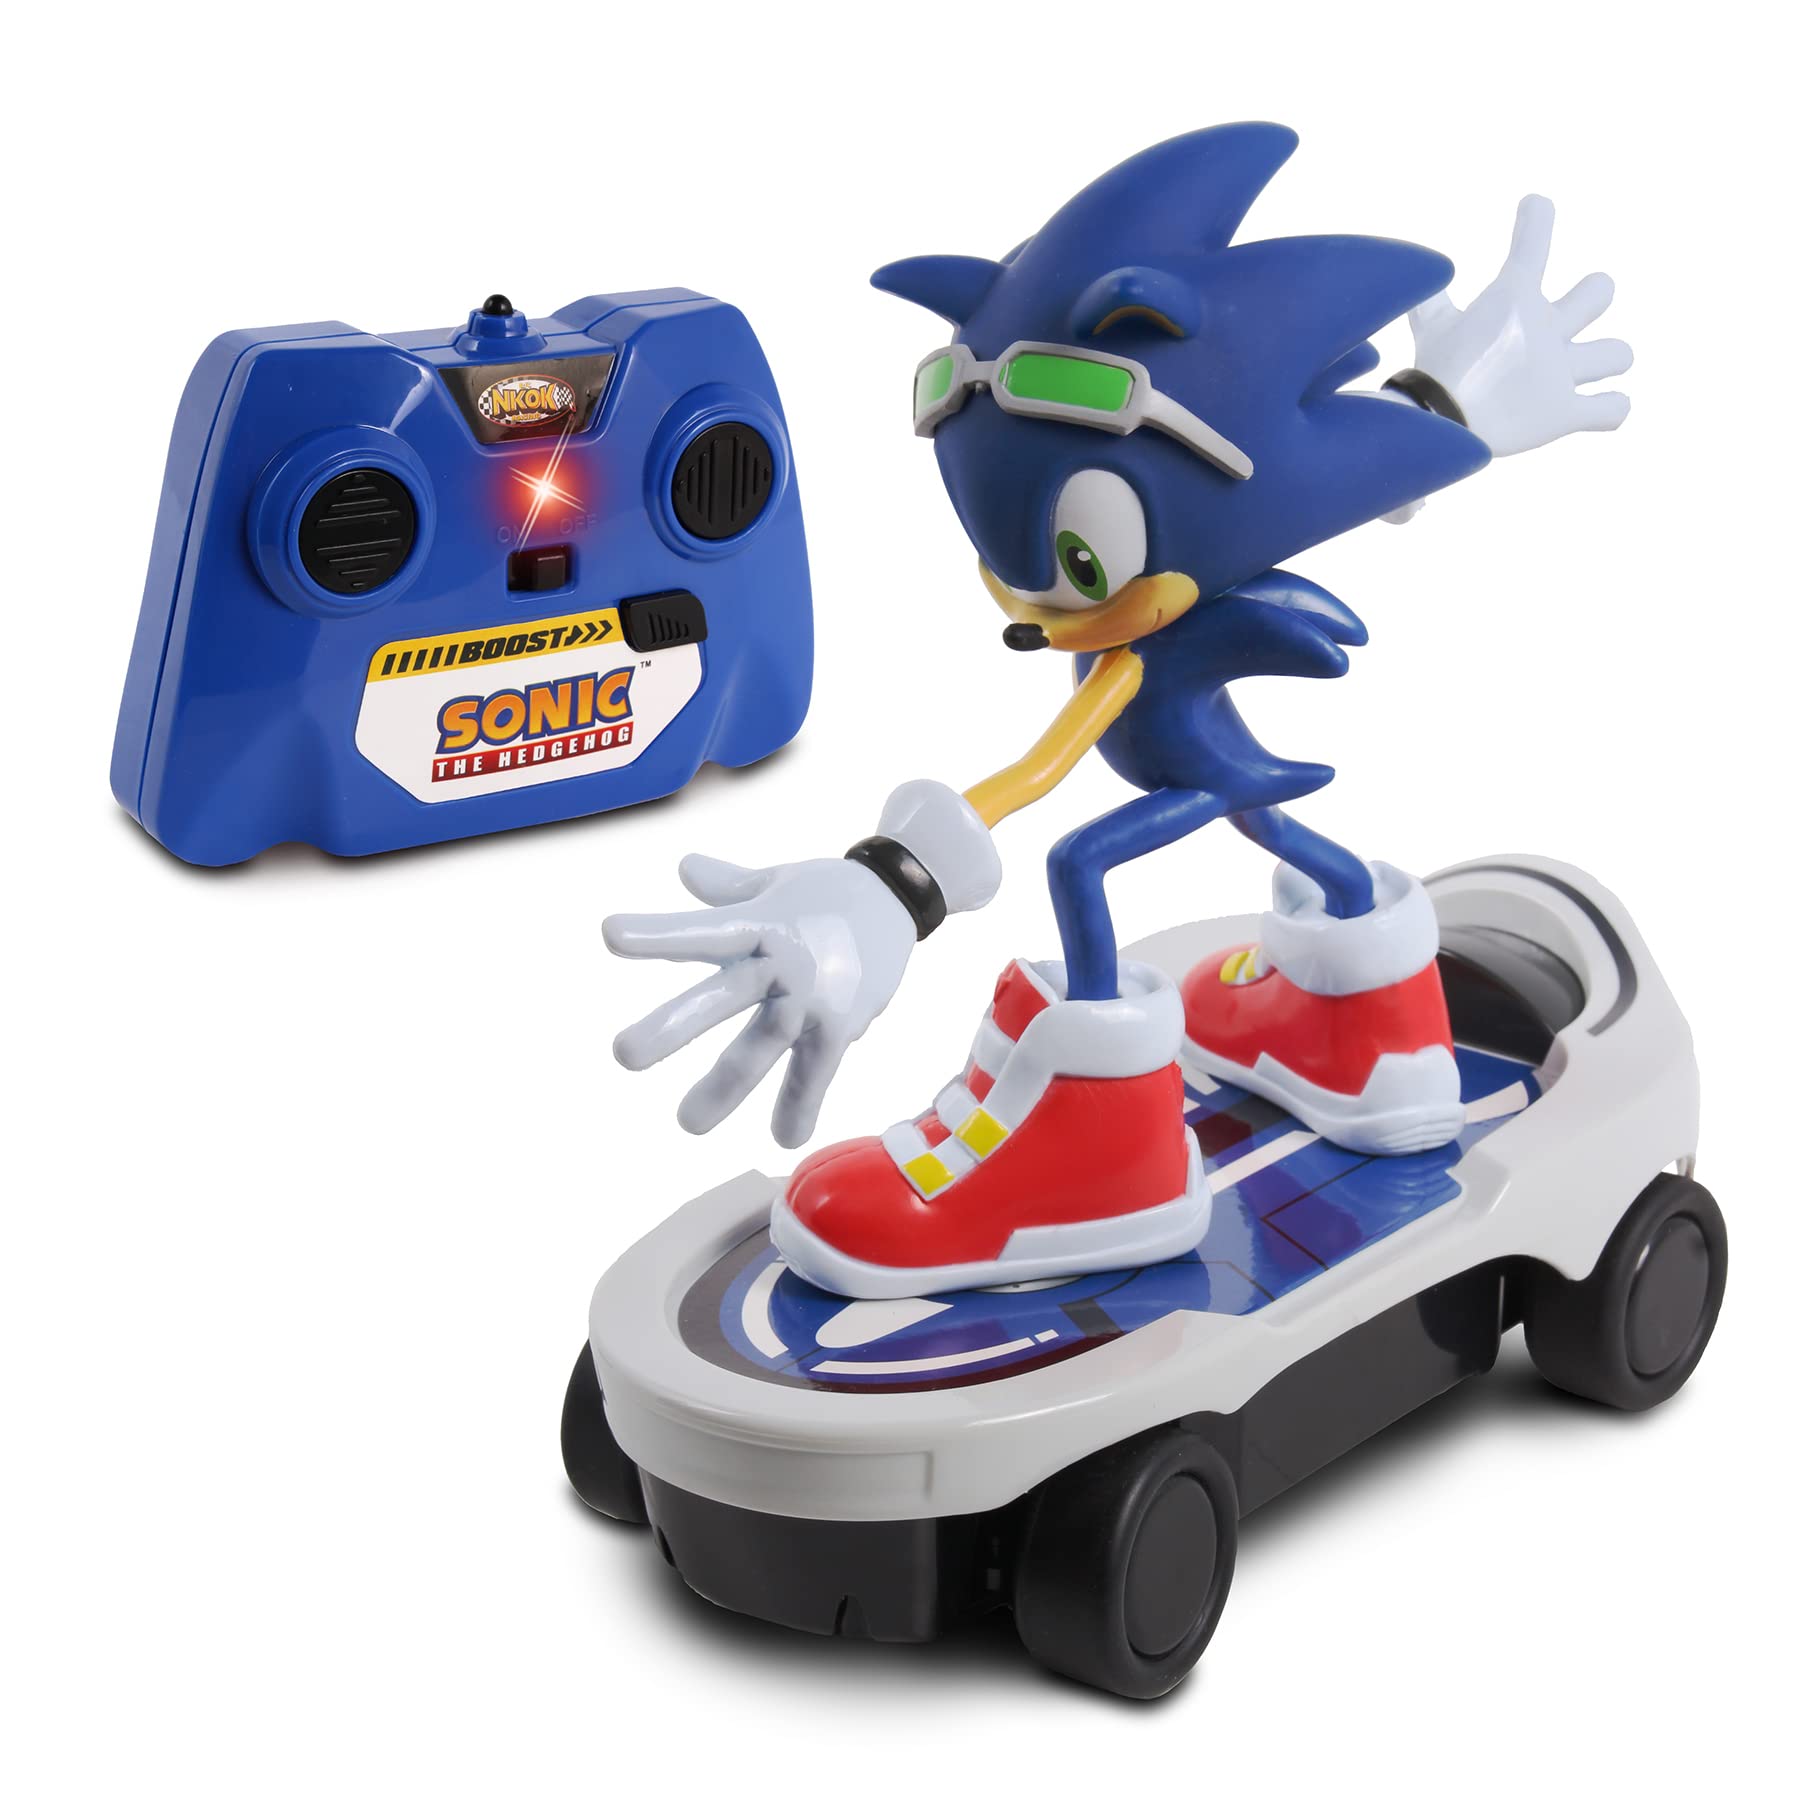 NKOK Sonic NKOK Free Rider R/C, Turbo Boost Feature: Goes from Fast to Super-Fast, Allows Children to Pretend to Drive and Have Fun at The Same Time, for Ages 6 and up